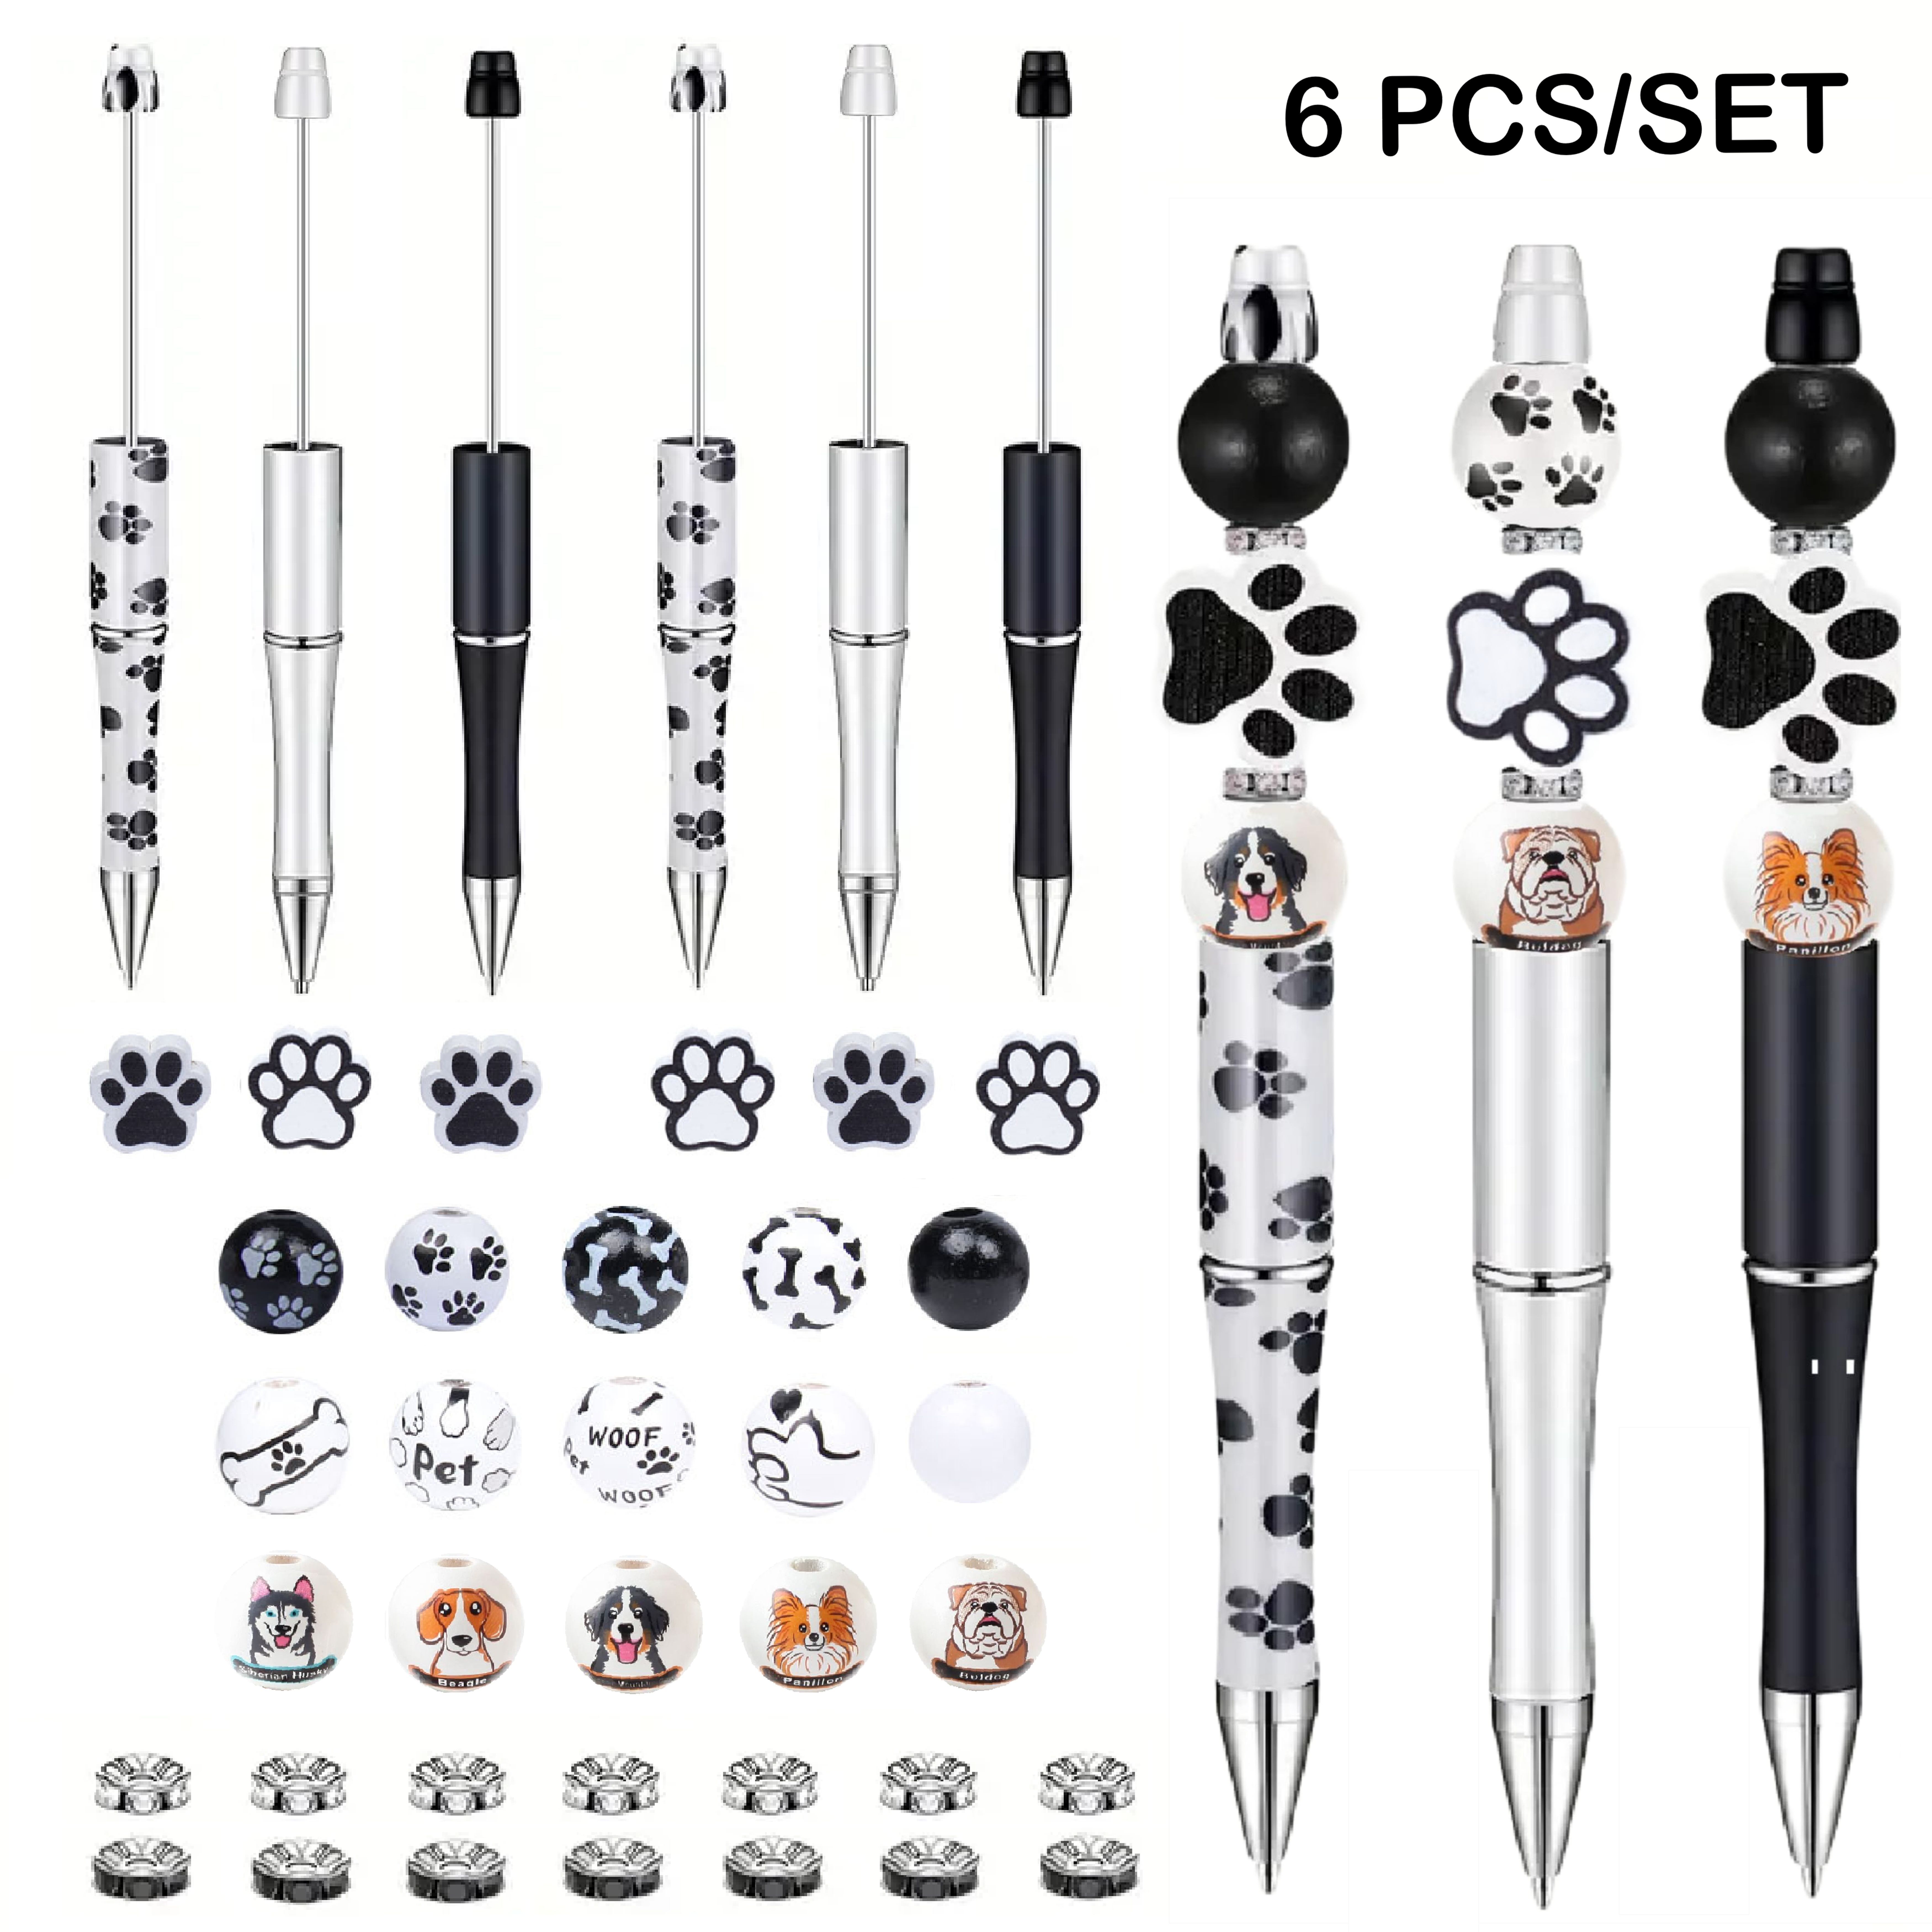 

6pcs Diy Black Ink Cute White Black Wooden Beads Cute Colorful Dog With Crystal Spacer Beads Ballpoint Pen, Very Suitable As A Gift For Family And Friends, Classroom, School Office Supplies.